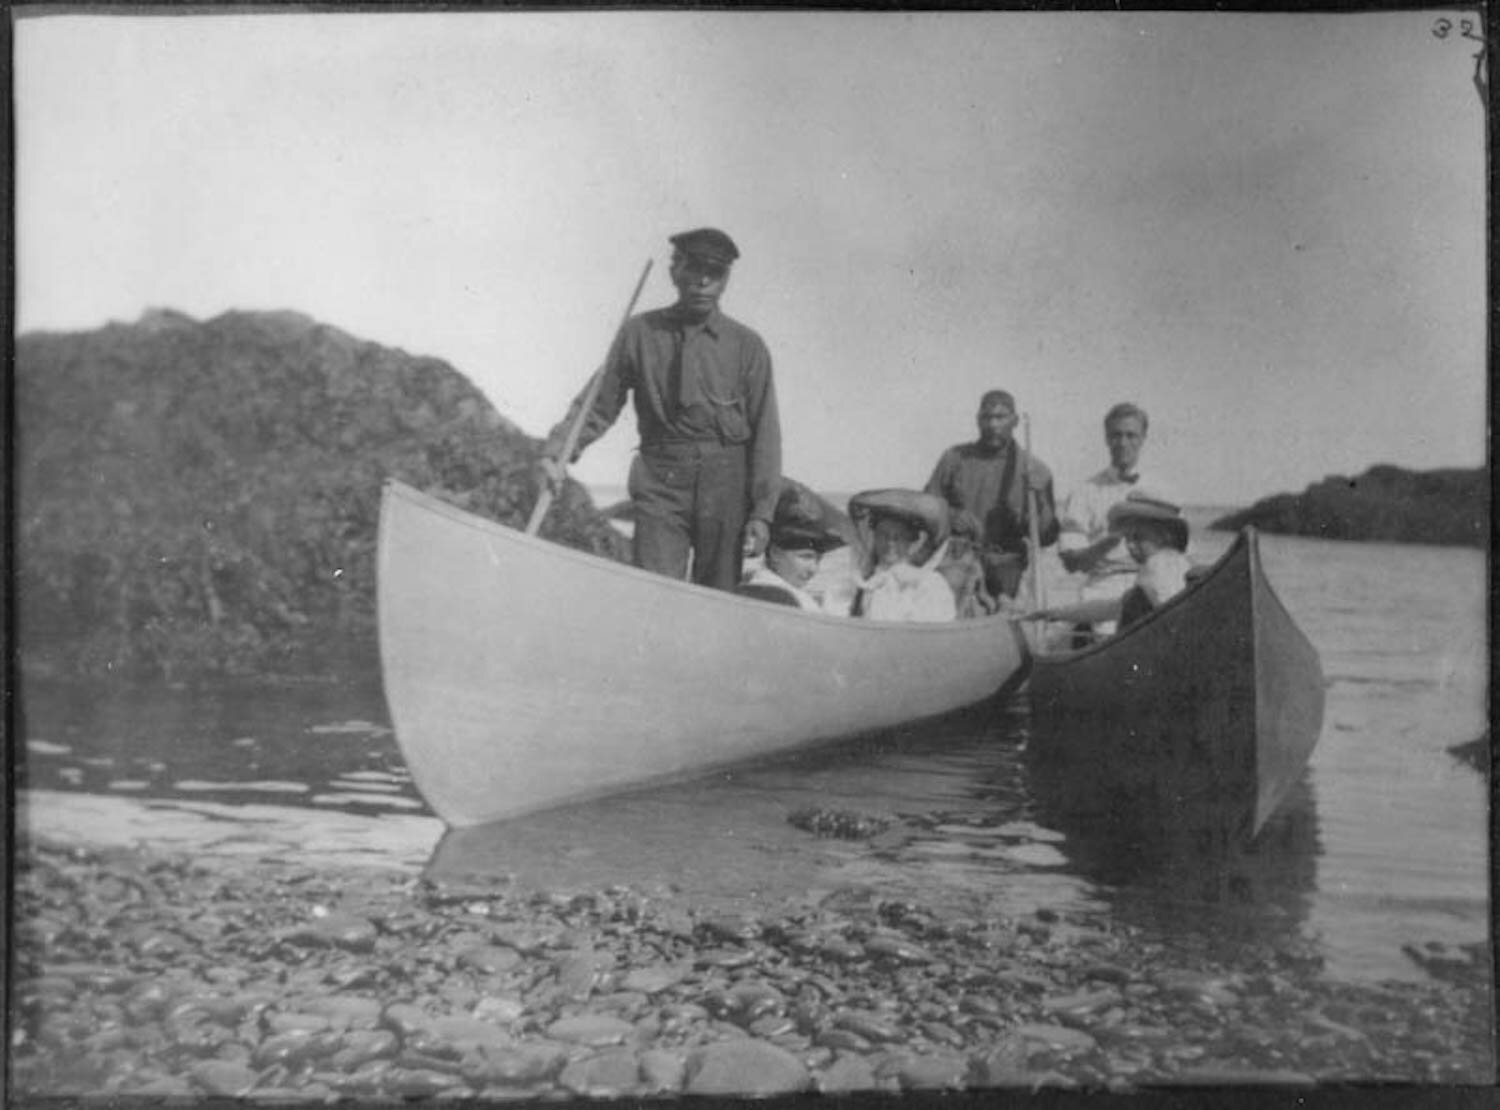 Franklin D. Roosevelt and Eleanor Roosevelt with two Passamaquoddy guides, Cousin Sarah, and Miss Spring on a canoe trip around the island in Campobello, New Brunswick, Canada. (1907)